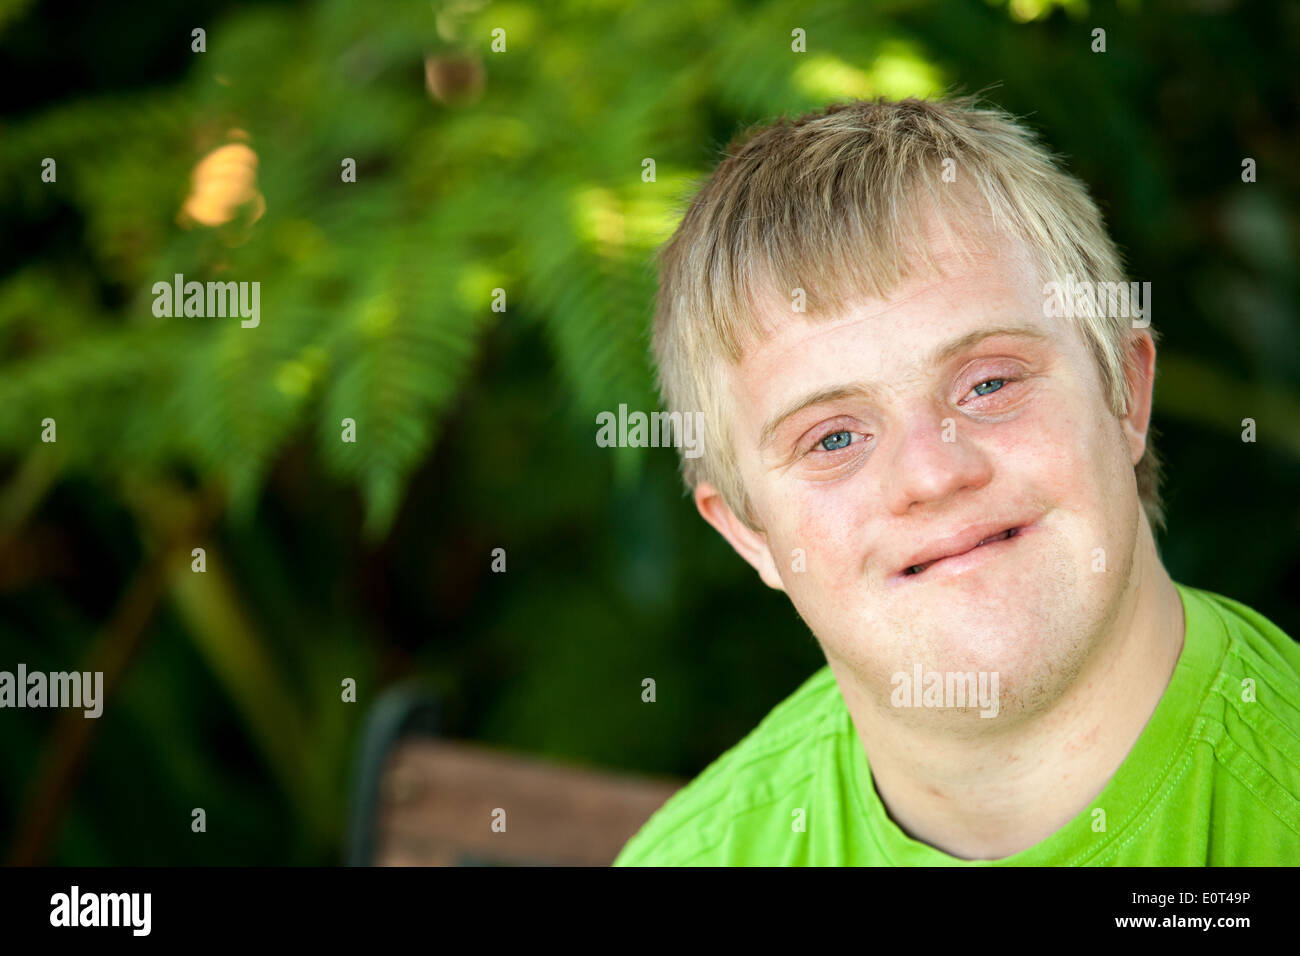 Close up face shot of friendly handicapped boy outdoors. Stock Photo